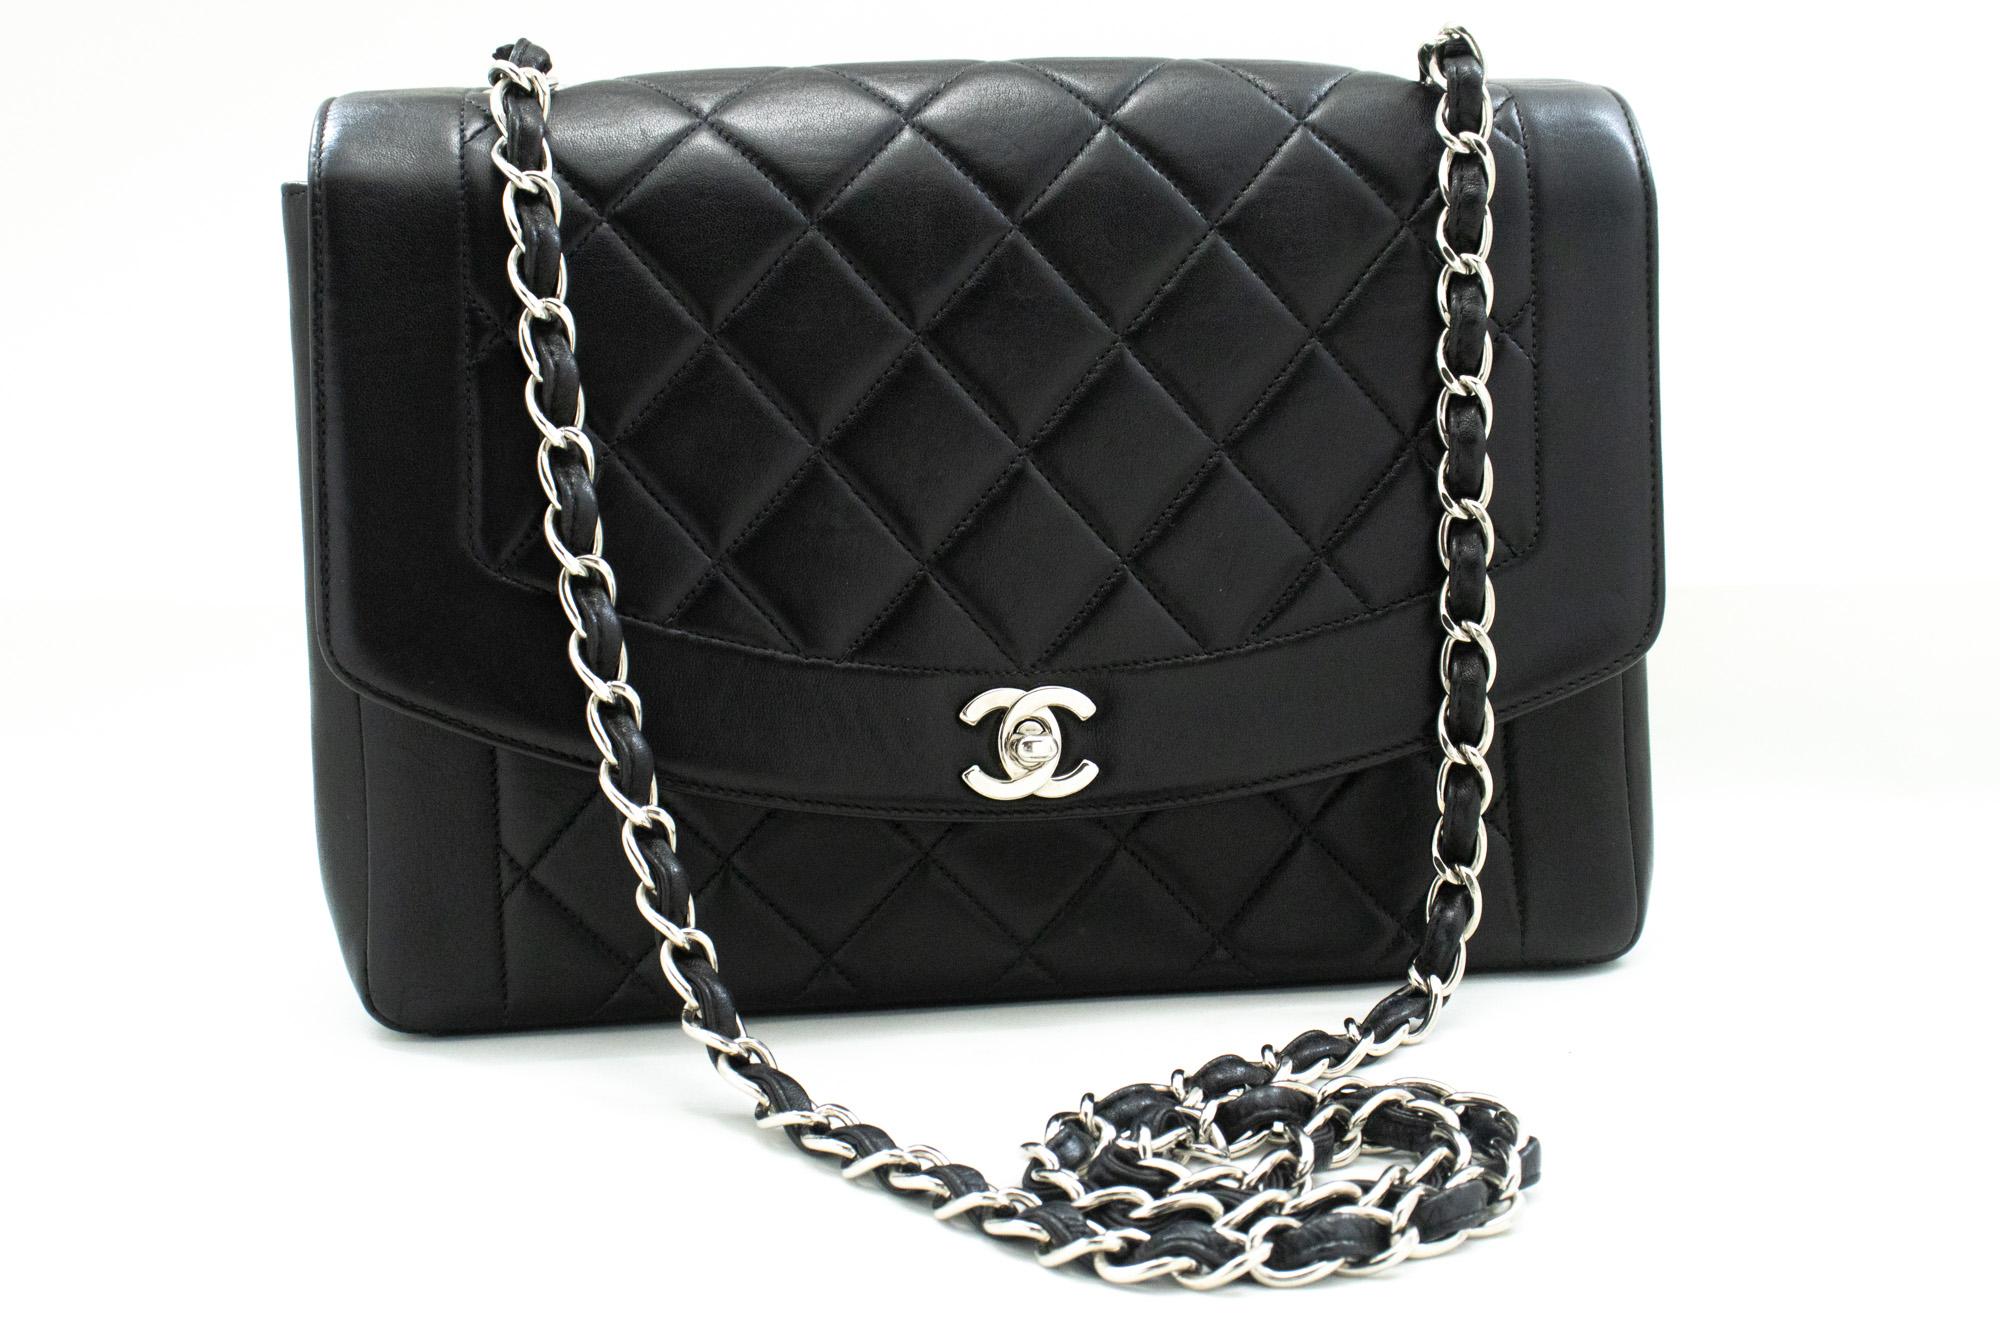 An authentic CHANEL Diana Flap Large Silver Chain Shoulder Bag Black Quilted. The color is Black. The outside material is Leather. The pattern is Solid. This item is Vintage / Classic. The year of manufacture would be 1996-1997.
Conditions &